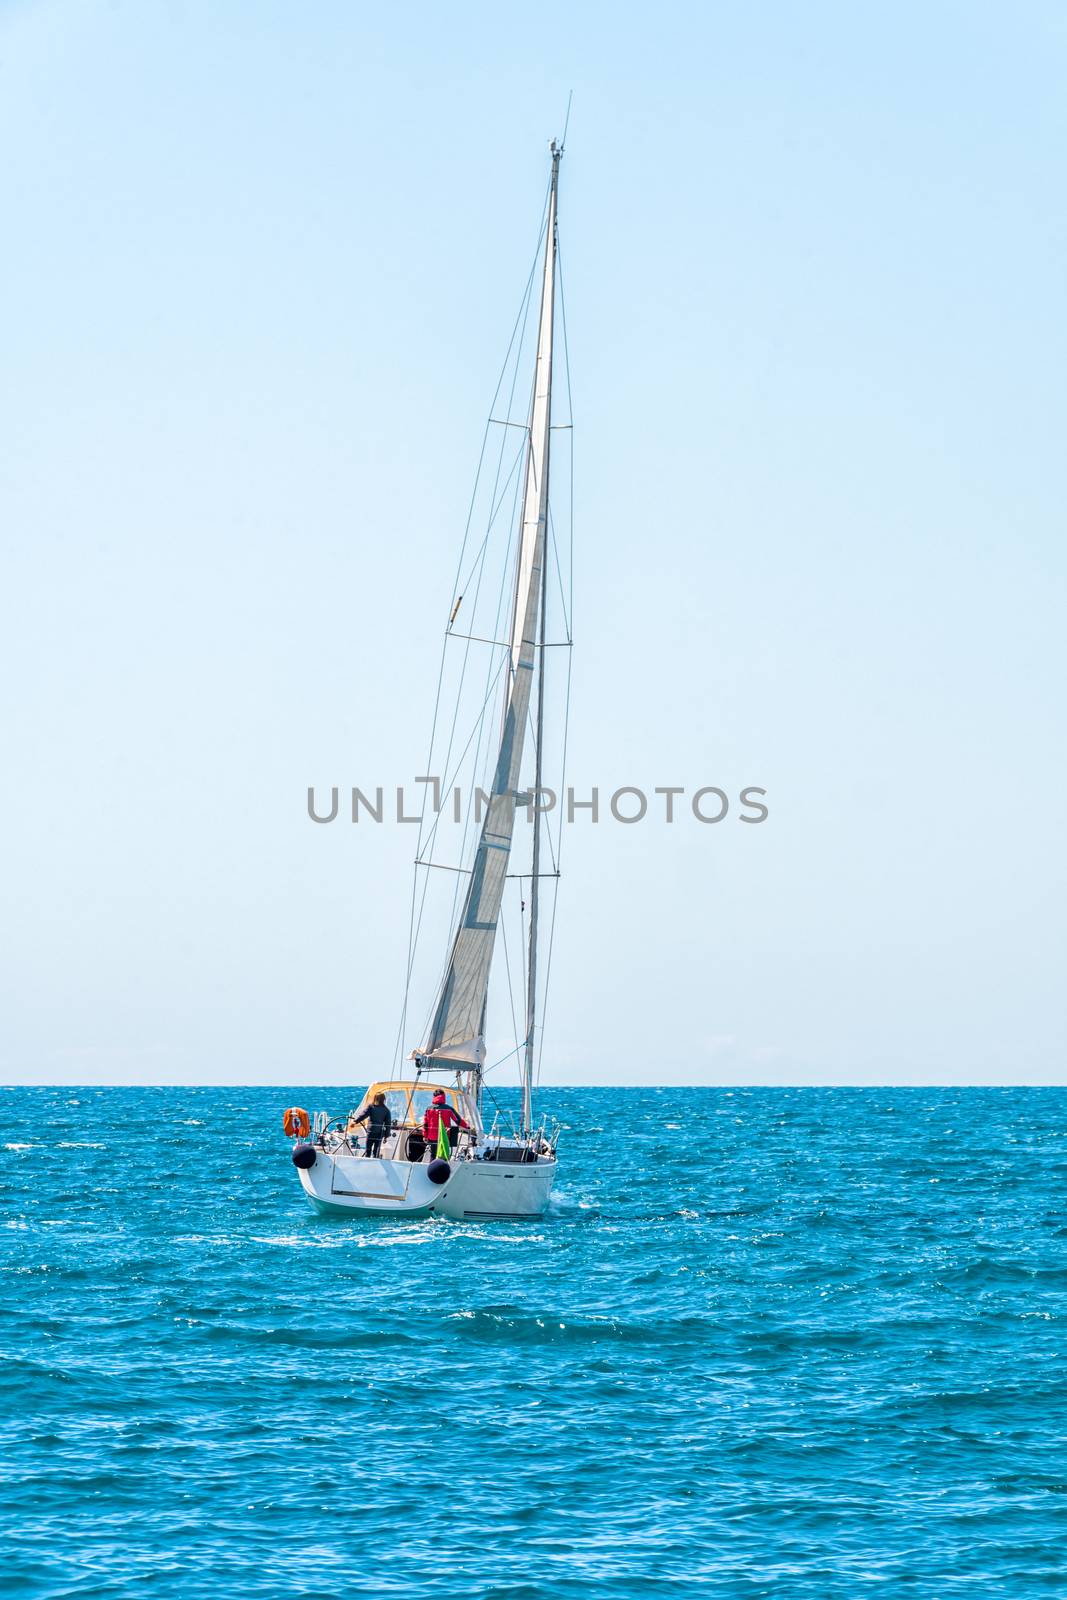 Sailing ship yachts with white sails in the open Sea, sailing boat on horizon, shot from behind